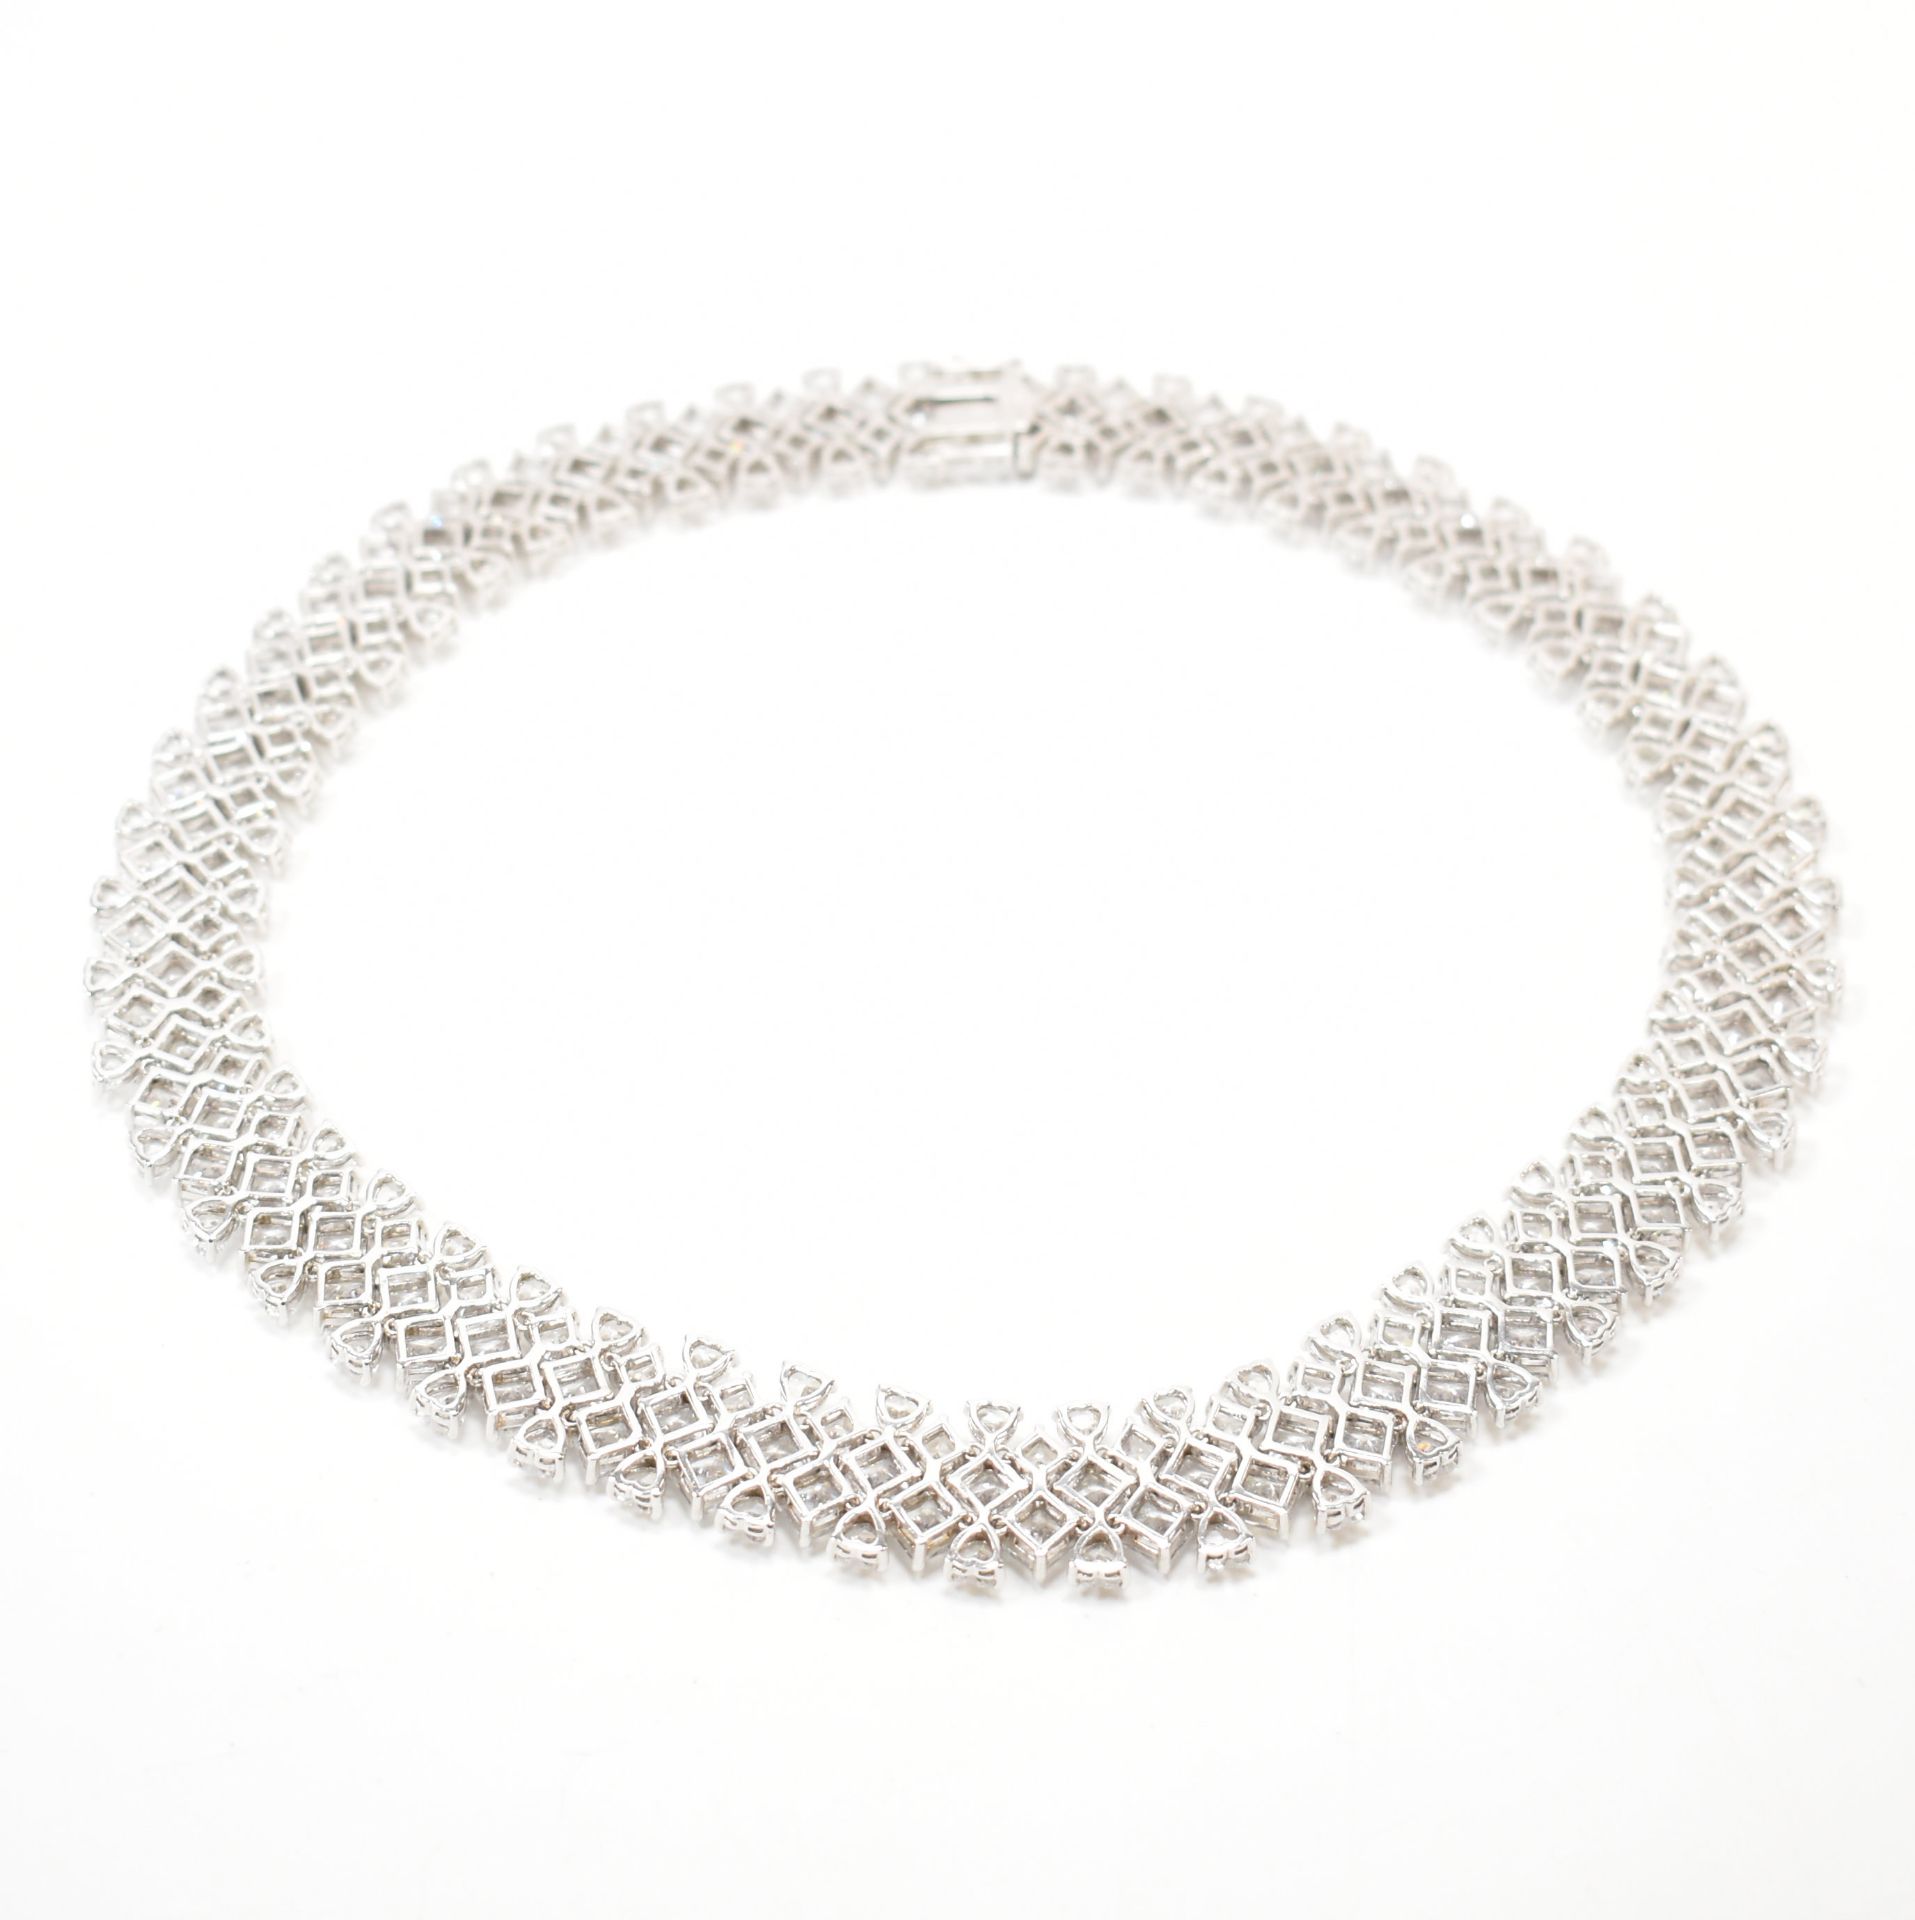 925 SILVER CUBIC ZIRCONIA STONE SET COLLAR NECKLACE - Image 4 of 5